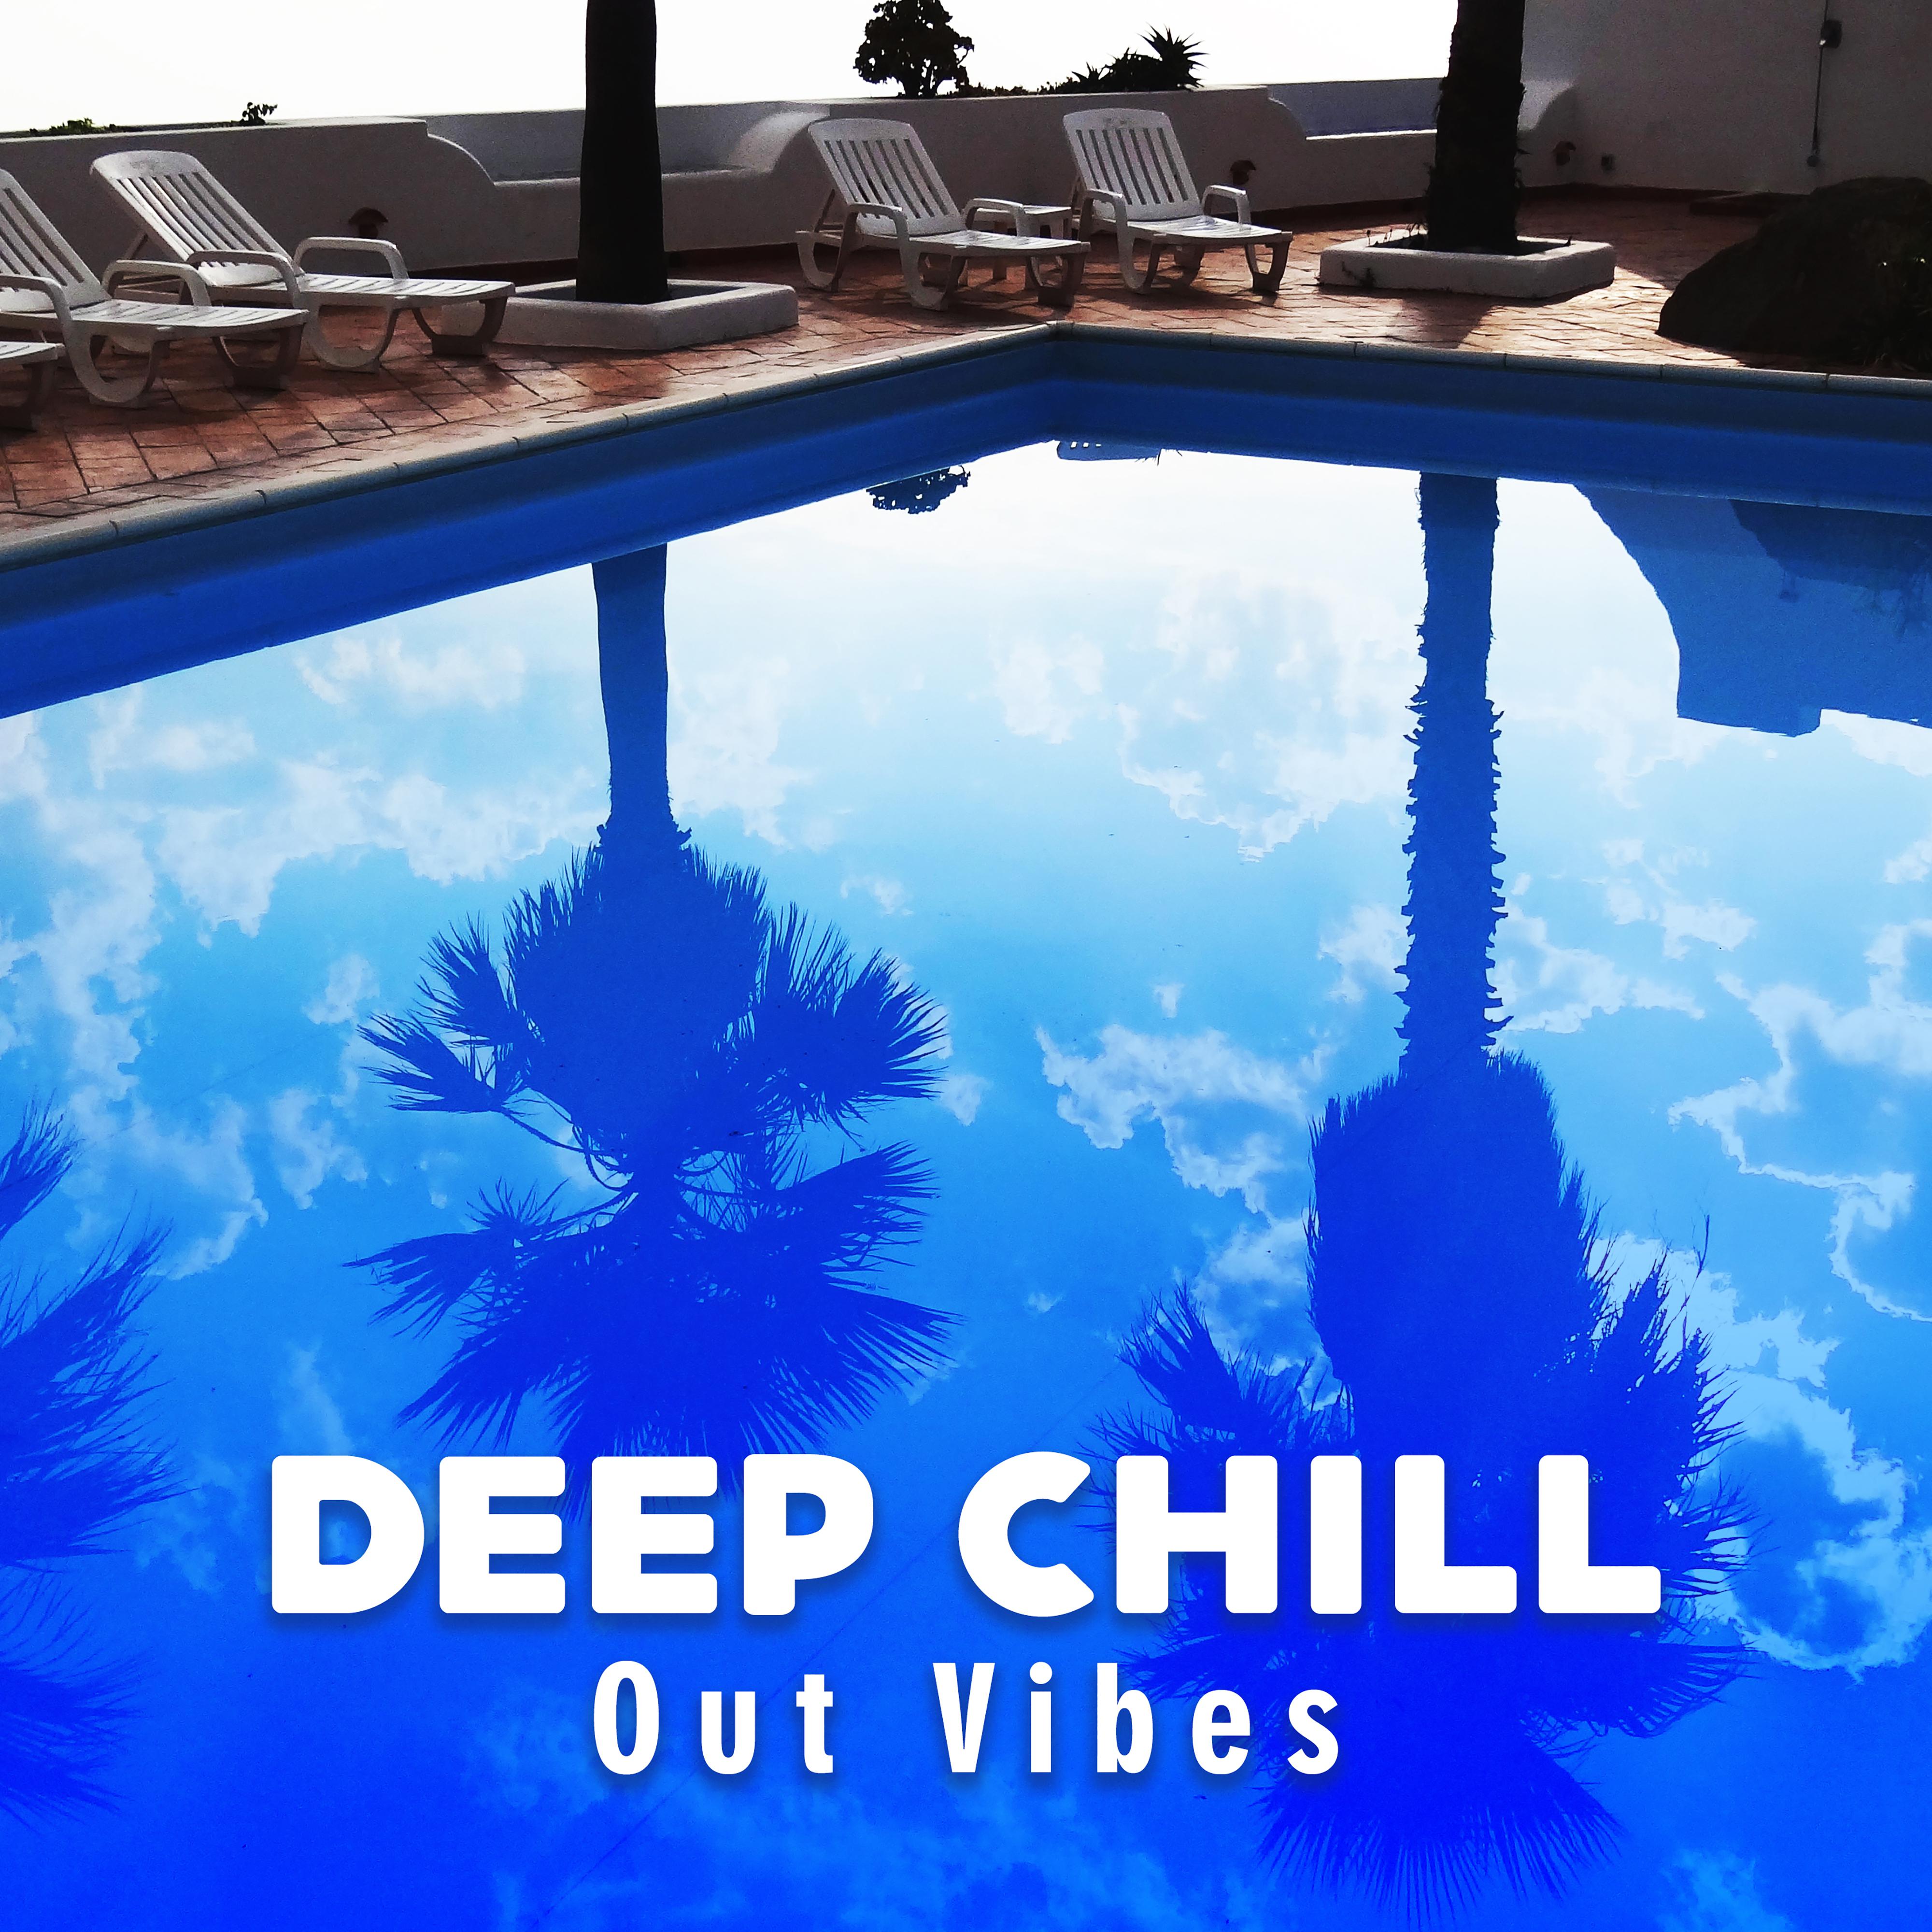 Deep Chill Out Vibes  Summer Relaxation, Peaceful Waves, Inner Calmness, Holiday Sun